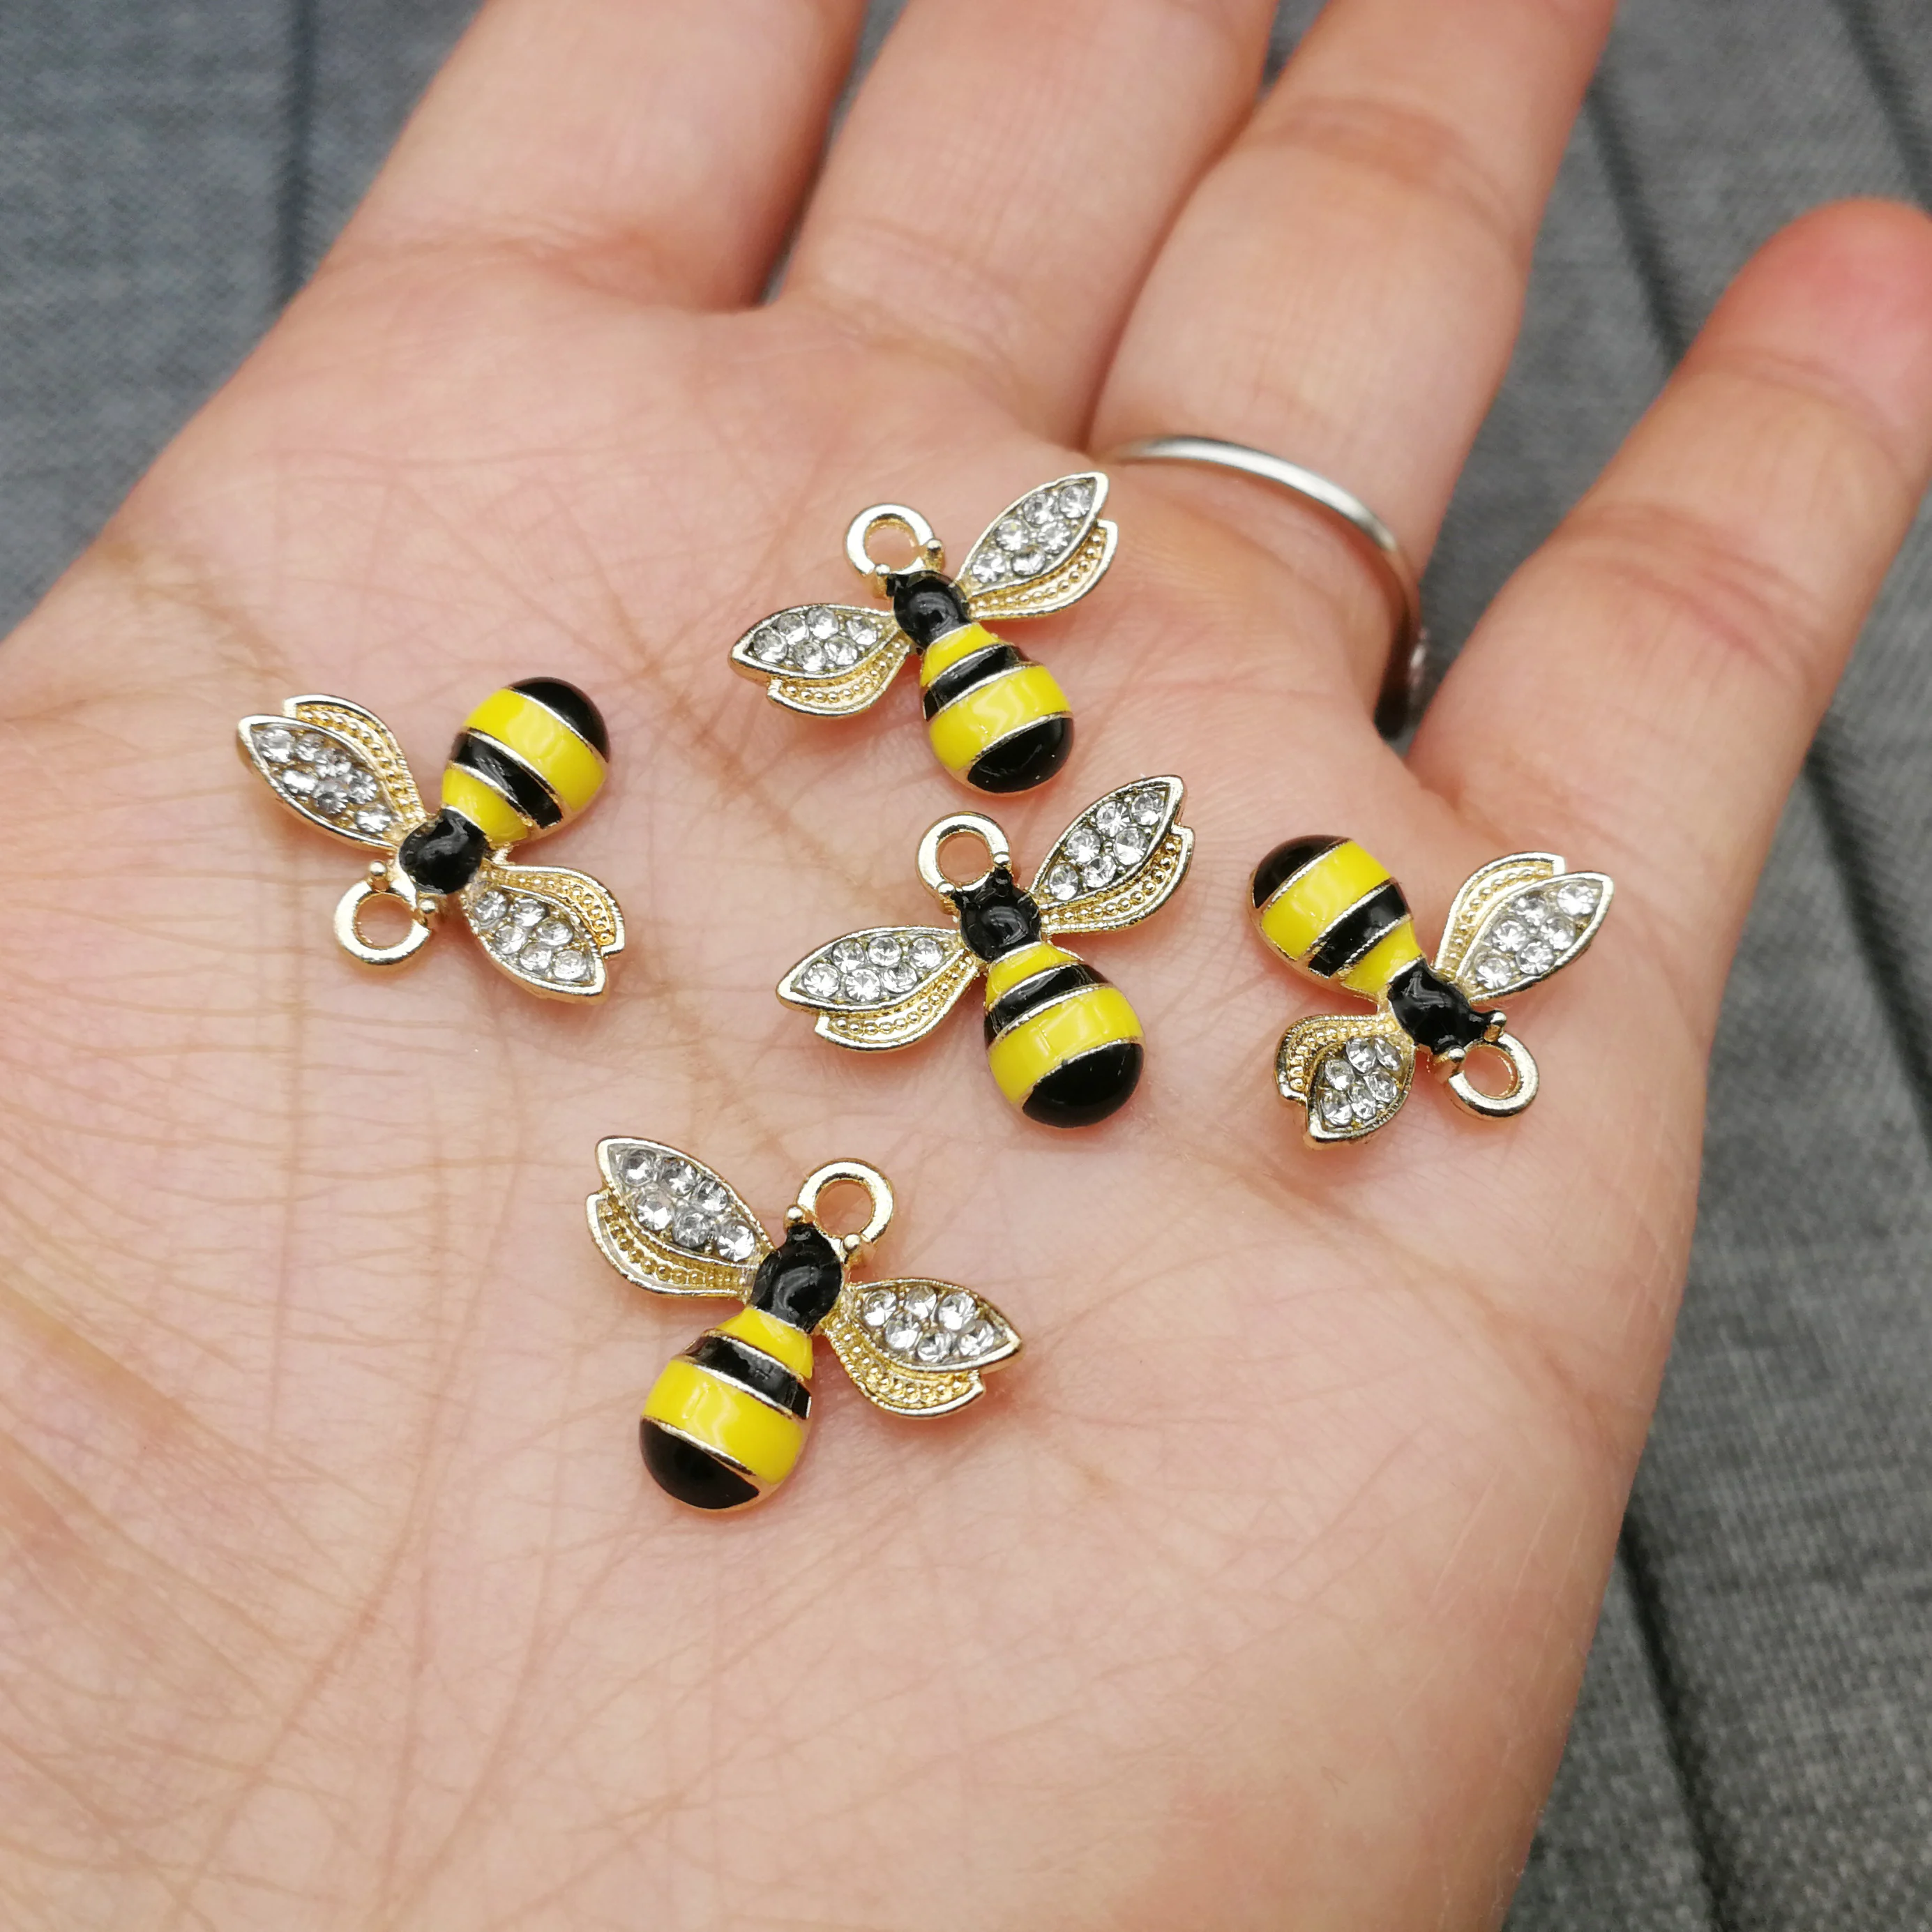 

Crystal Enamel Bee Charms for Jewelry Making and Crafting Charm Fashion Pendant DIY Insect Jewelry Findings Accessories 5PCS